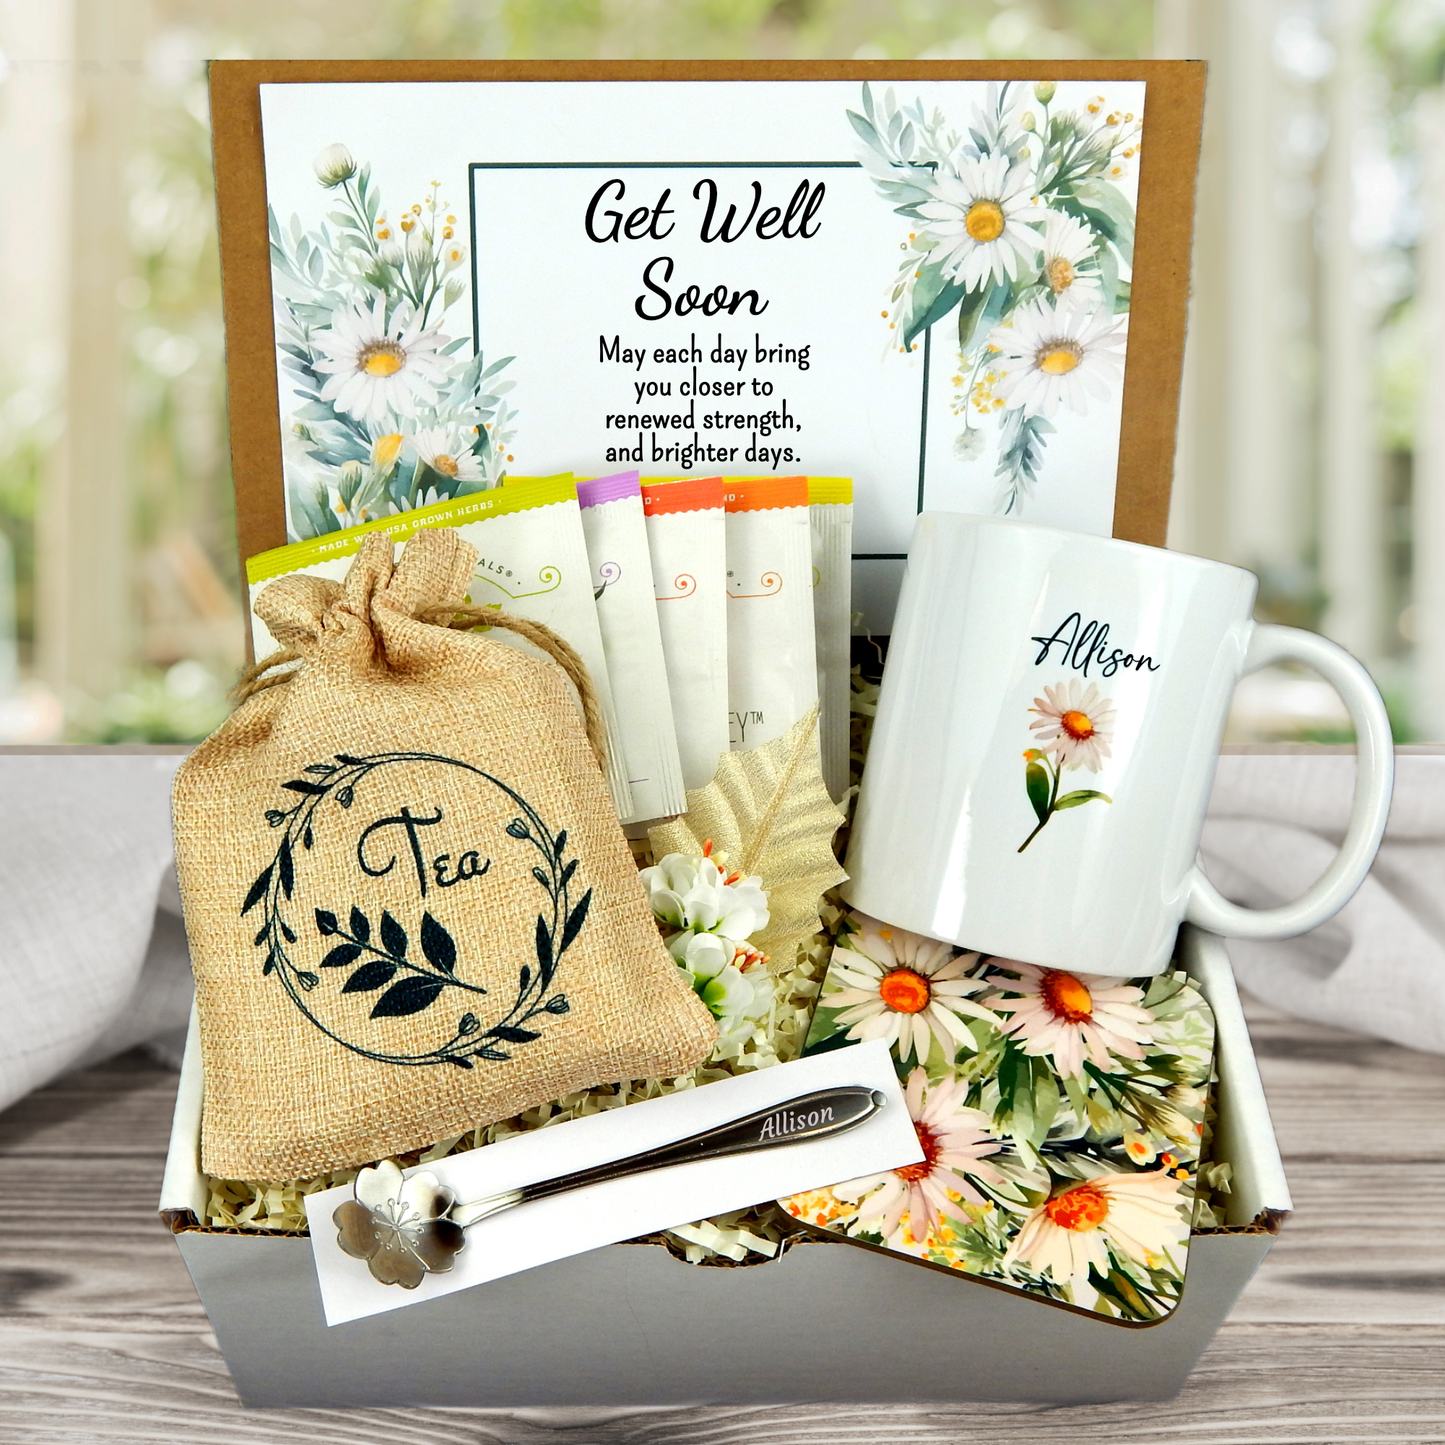 Get Well Soon Gift Care Package with Healing Herbal Teas for a Speedy Recovery